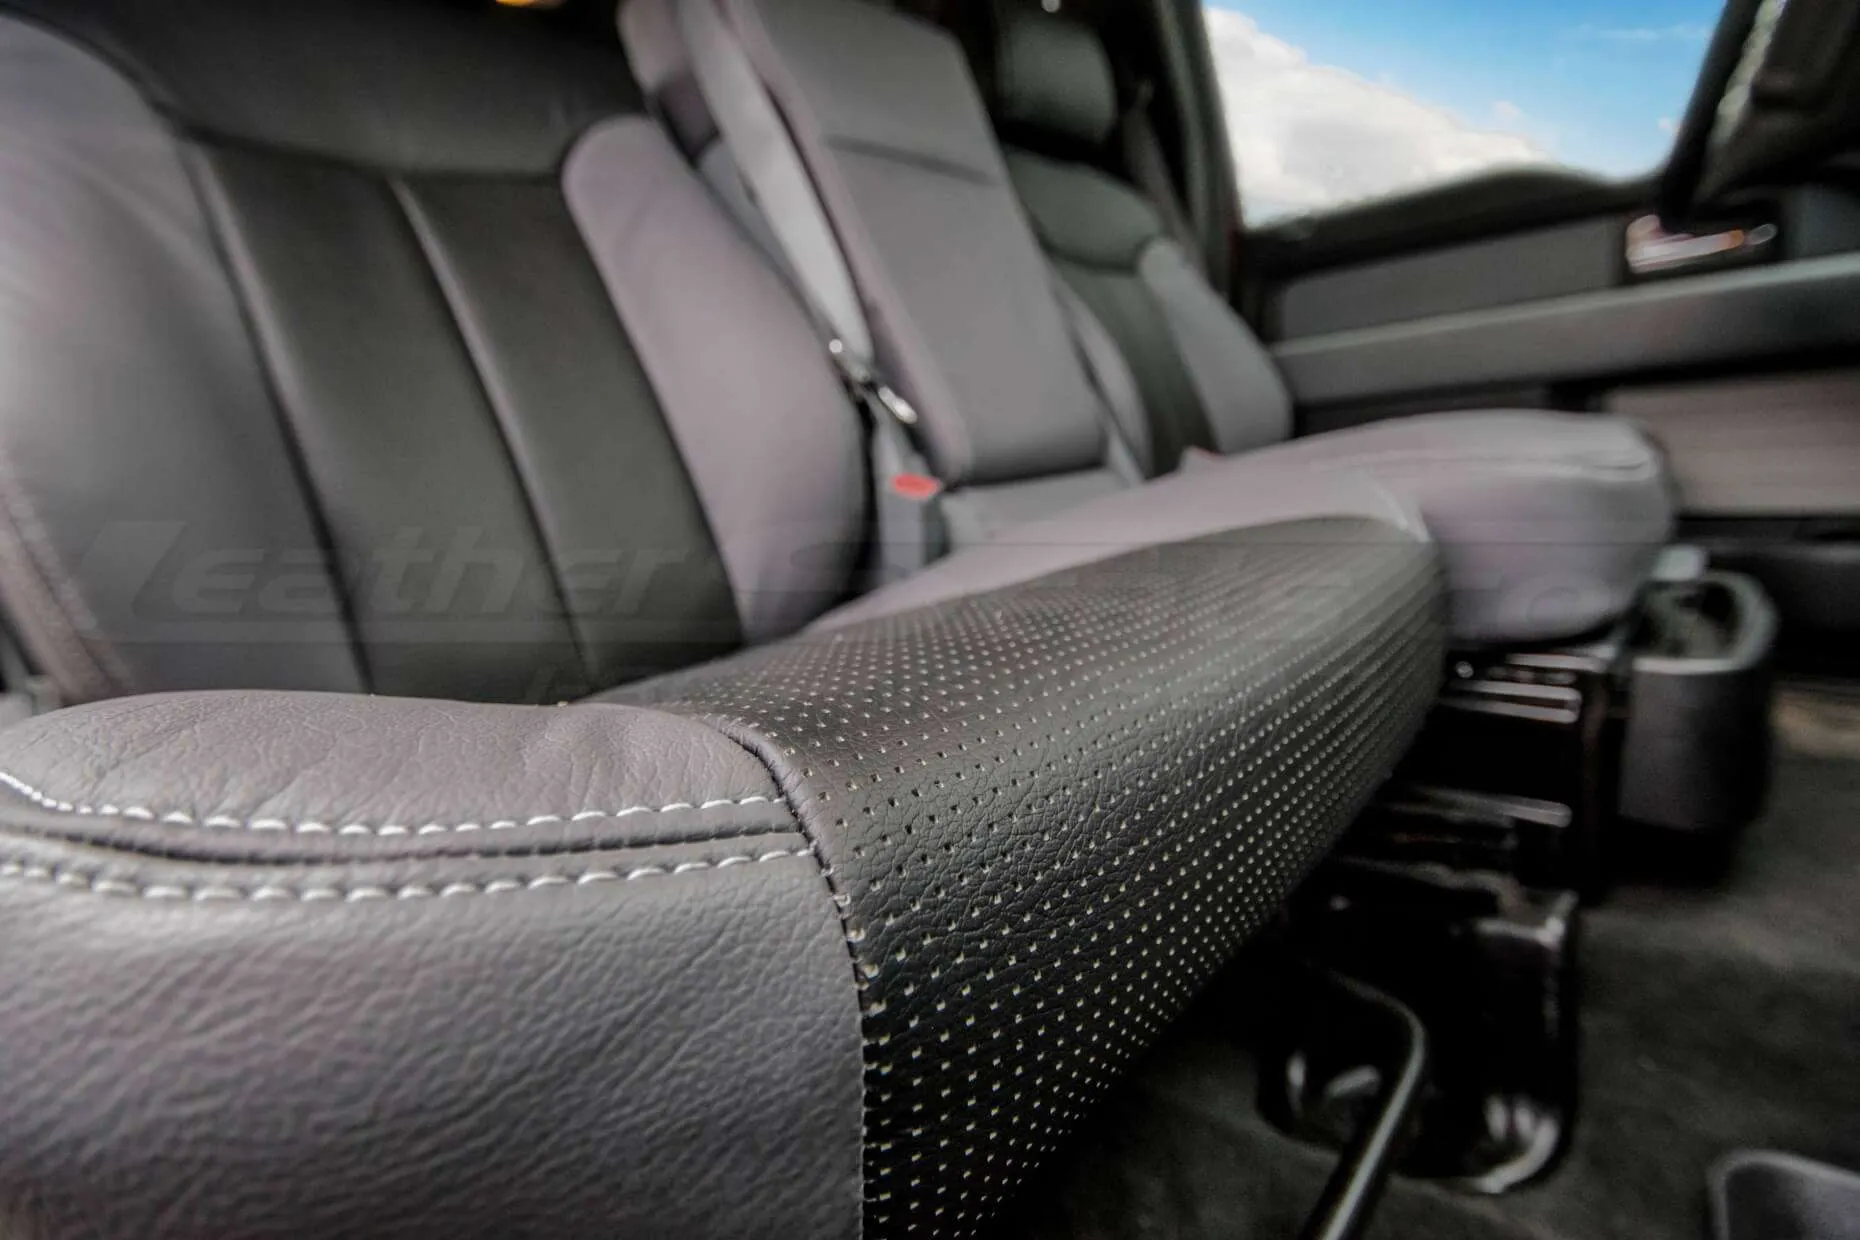 12-14 Ford F-150 - Two-Tone Lapis w/ Piazza Grey - Perforated seat cushion close-up